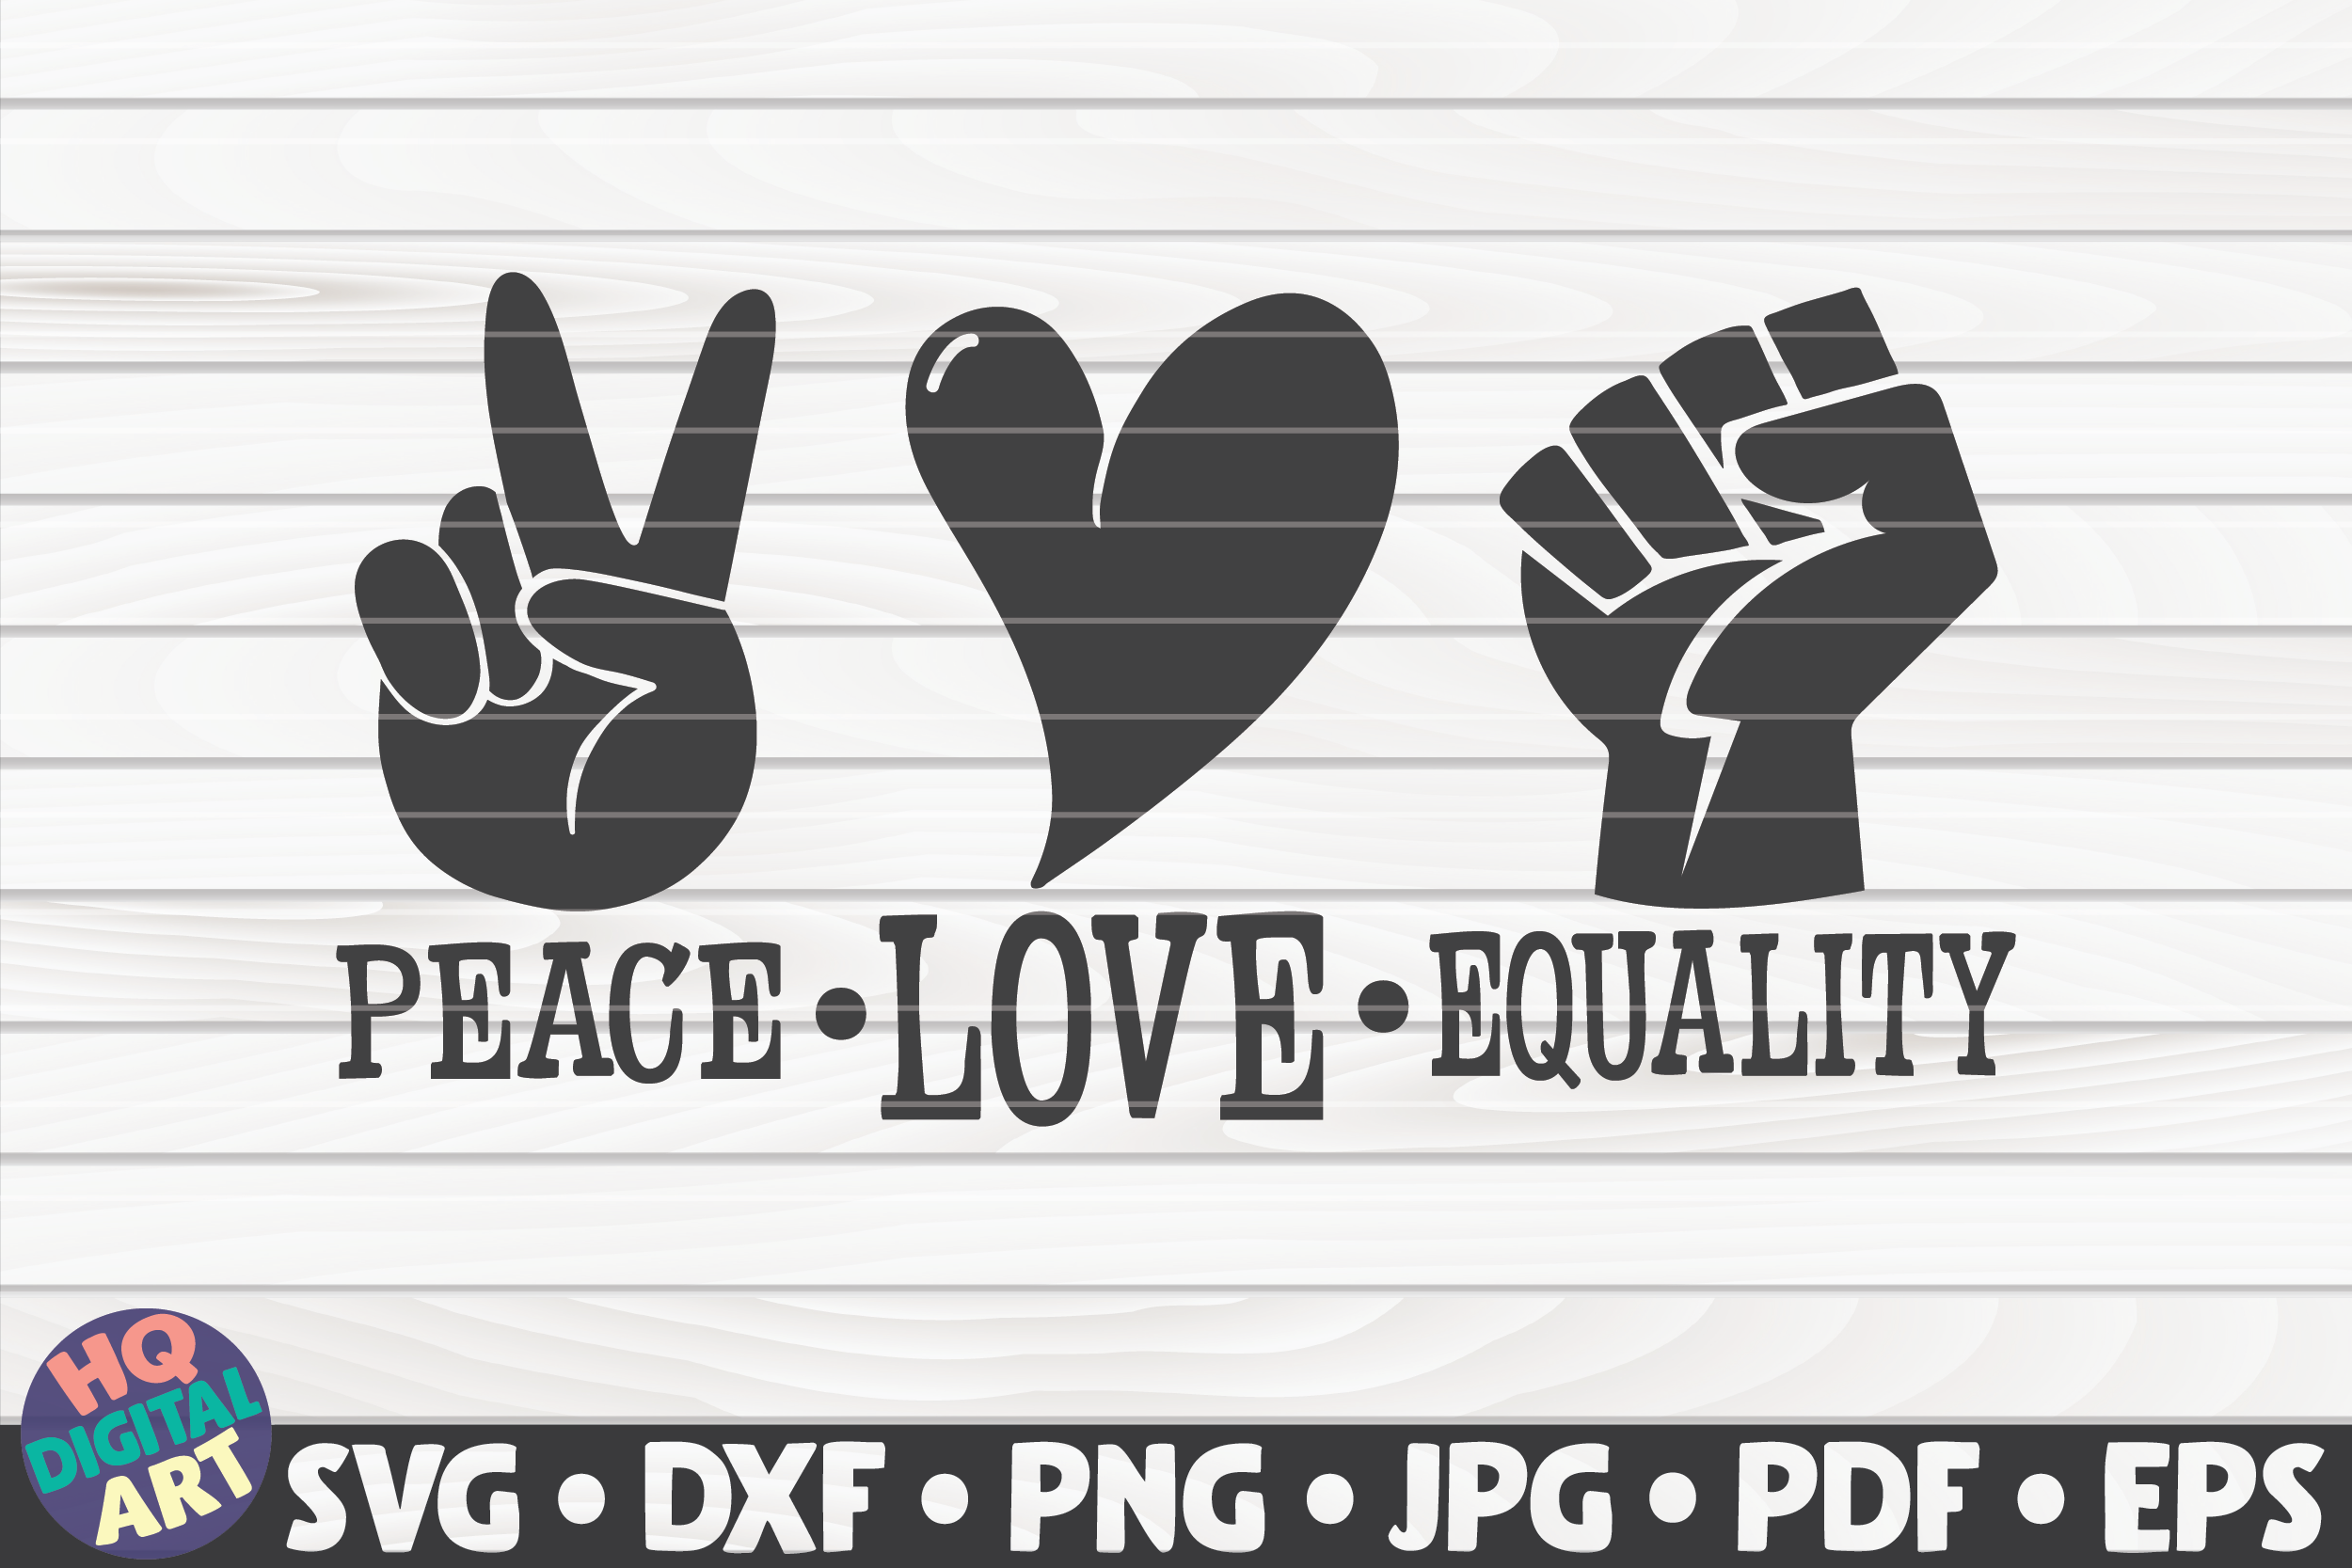 Download Peace Love Equality Svg Blm Quote By Hqdigitalart Thehungryjpeg Com